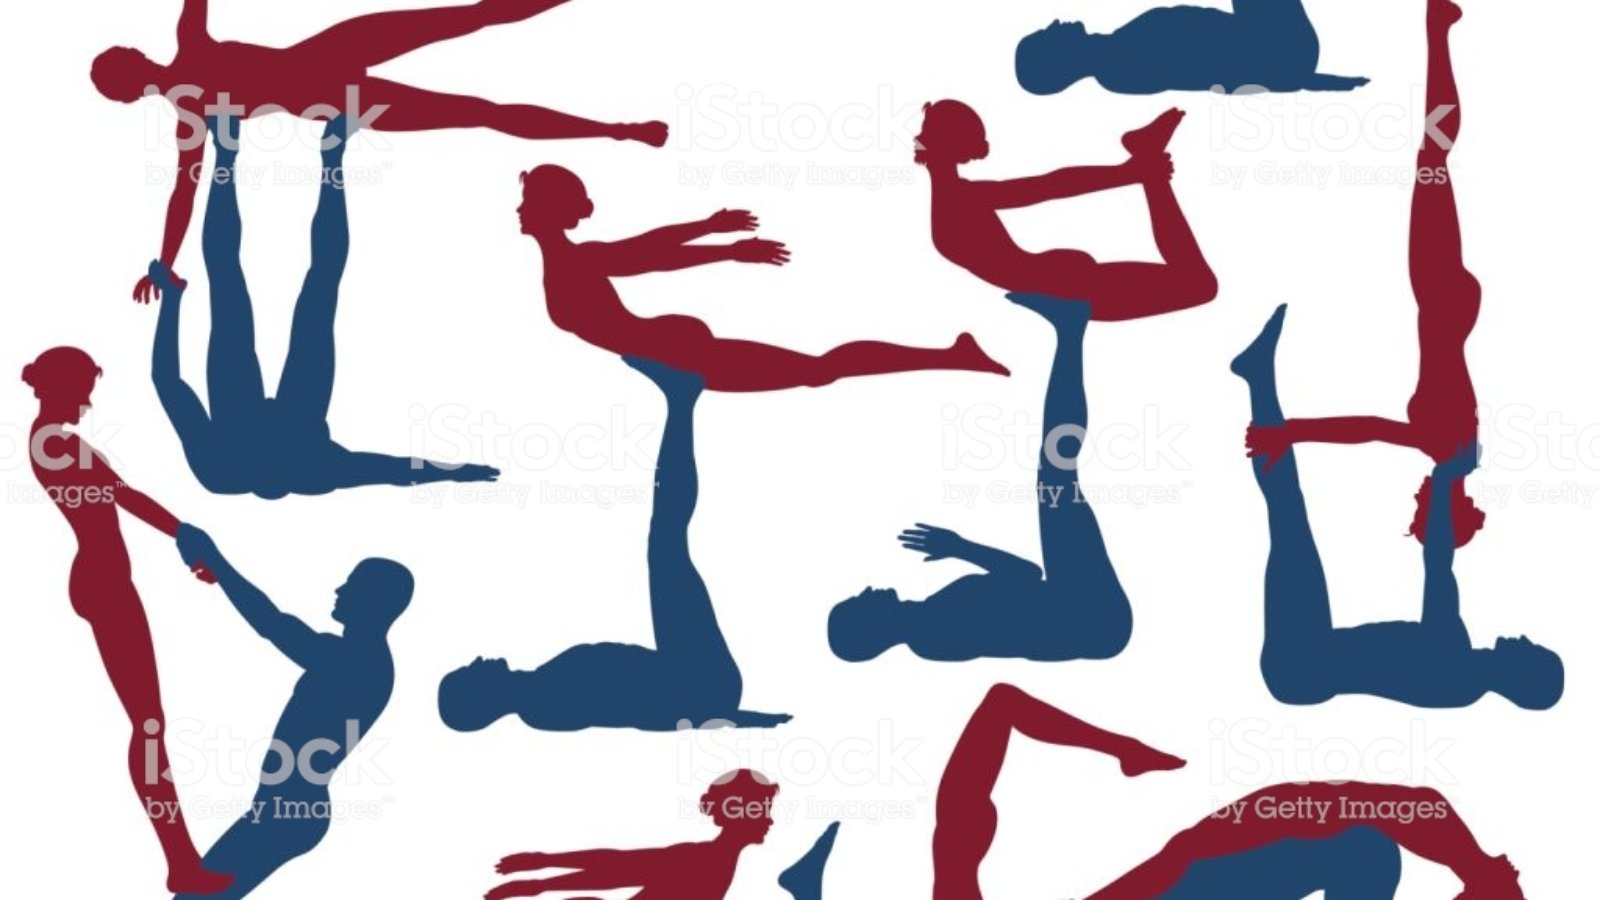 Set of editable vector silhouettes of man and woman in various acroyoga positions